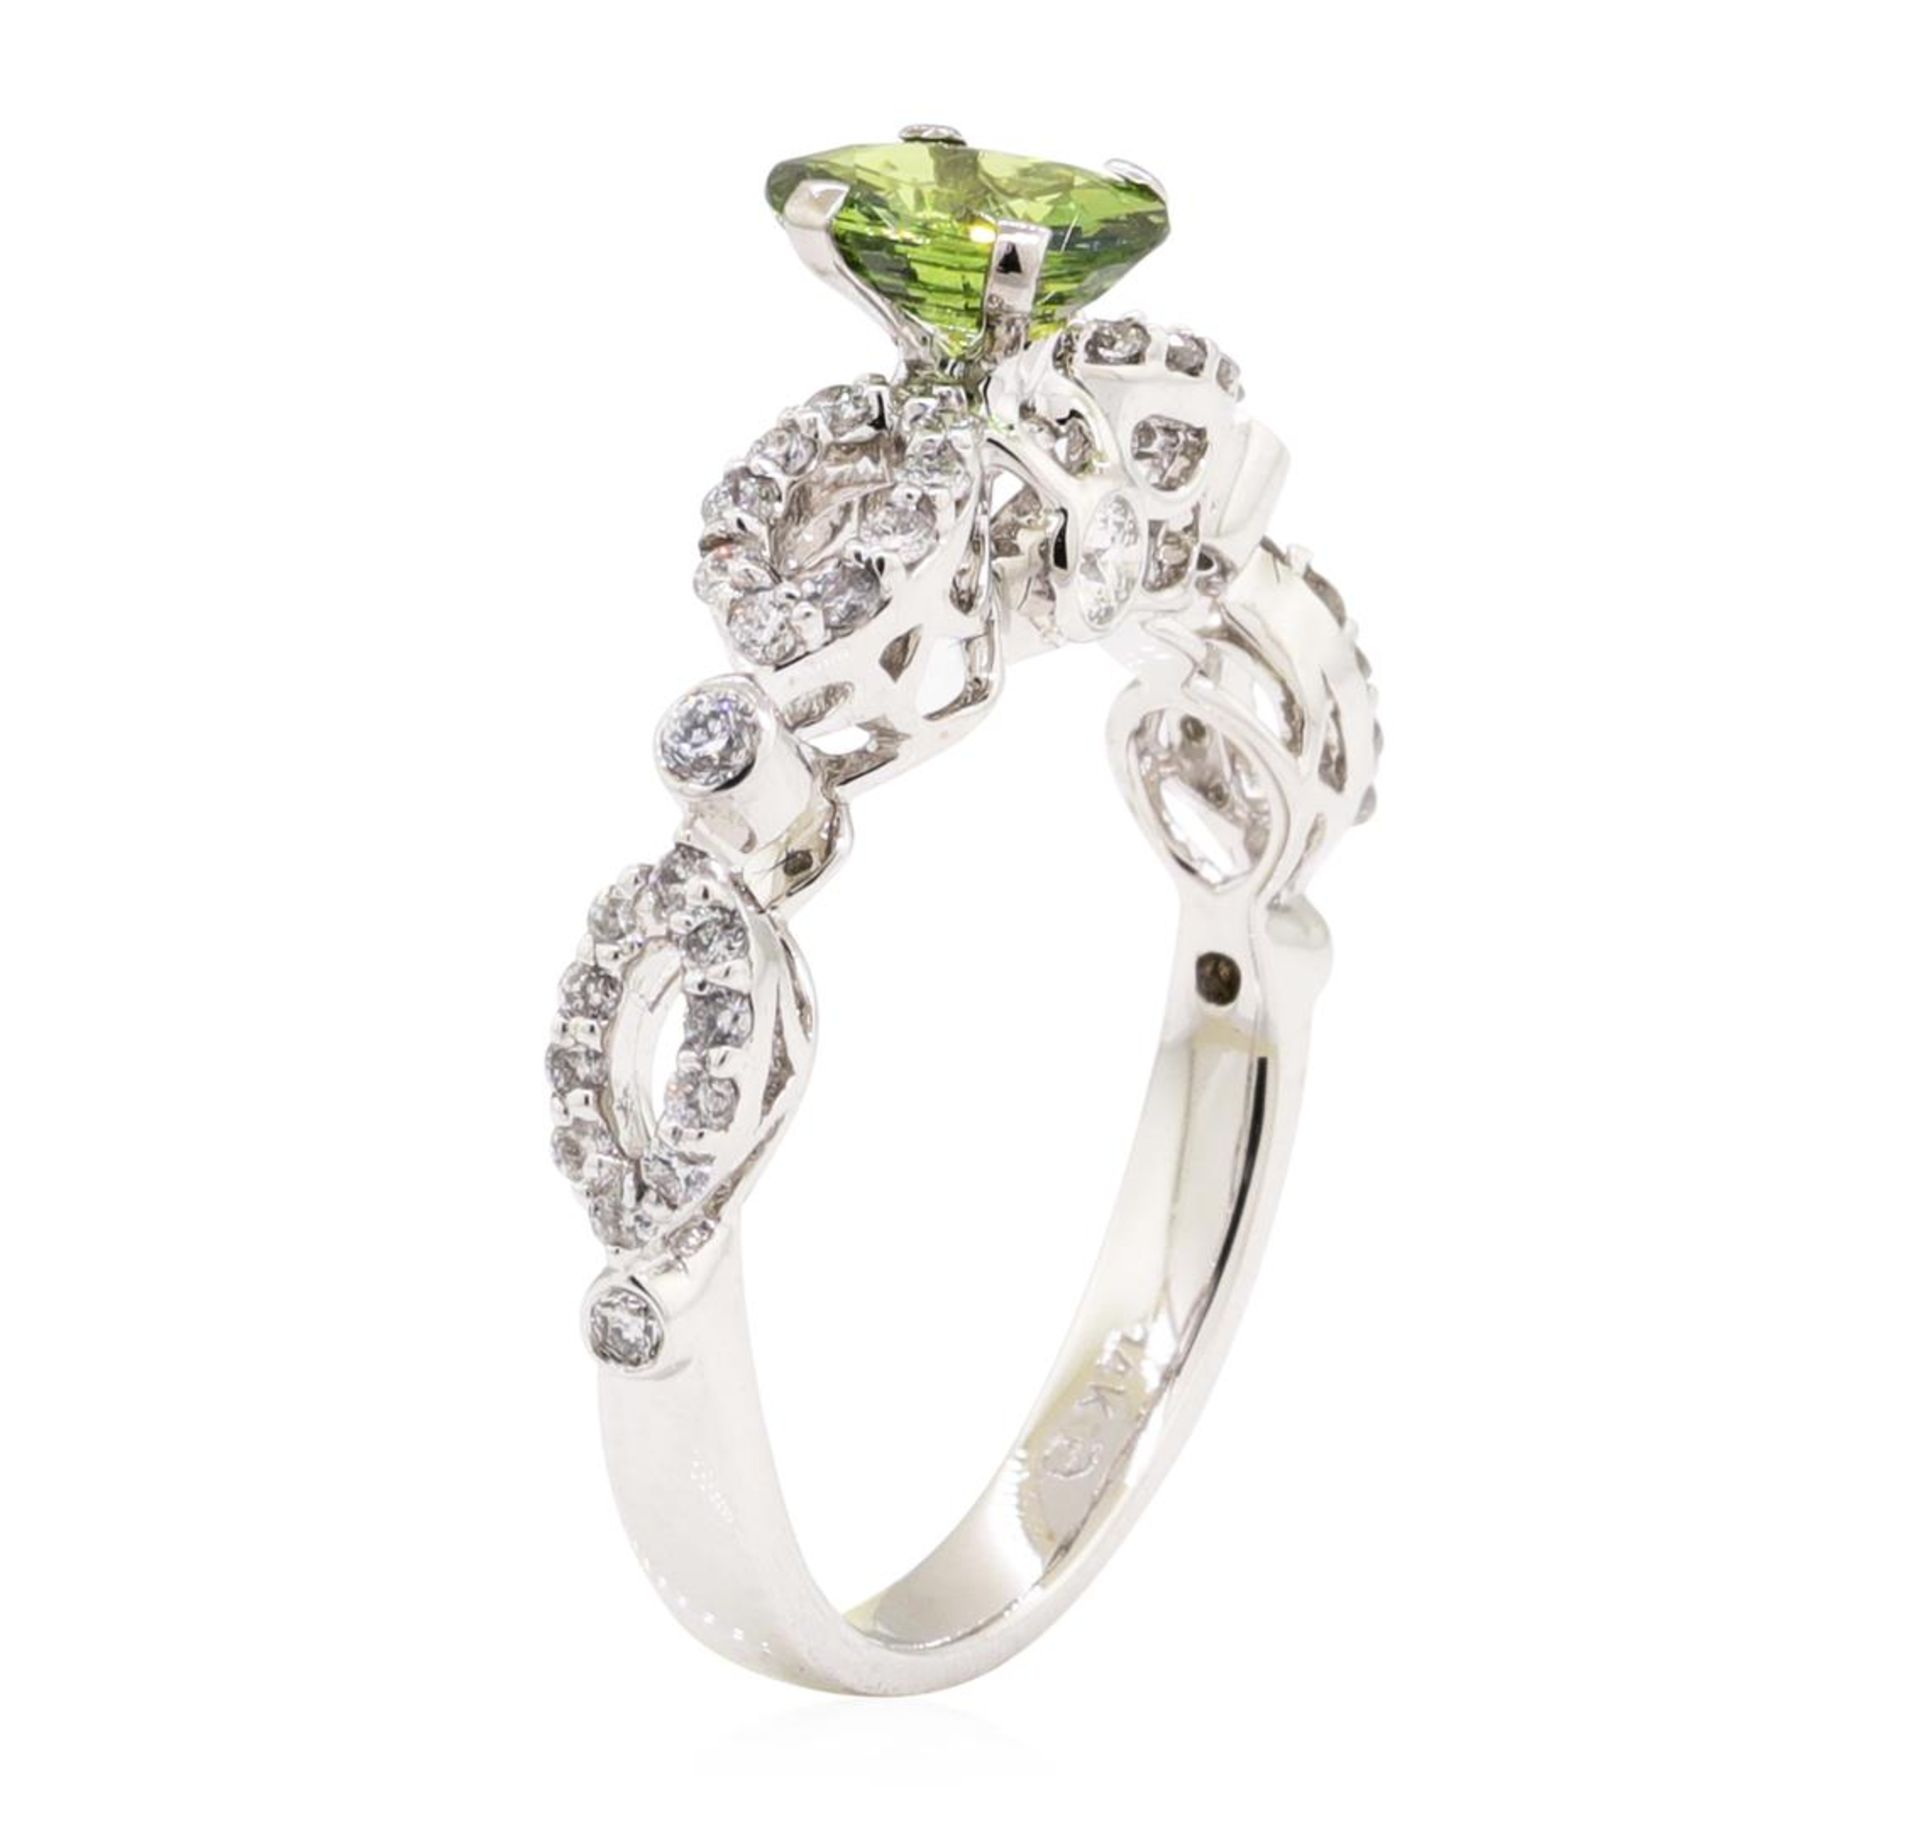 1.24 ctw Oval Mixed Demantoid Garnet And Round Brilliant Cut Diamond Ring - 14KT - Image 4 of 5